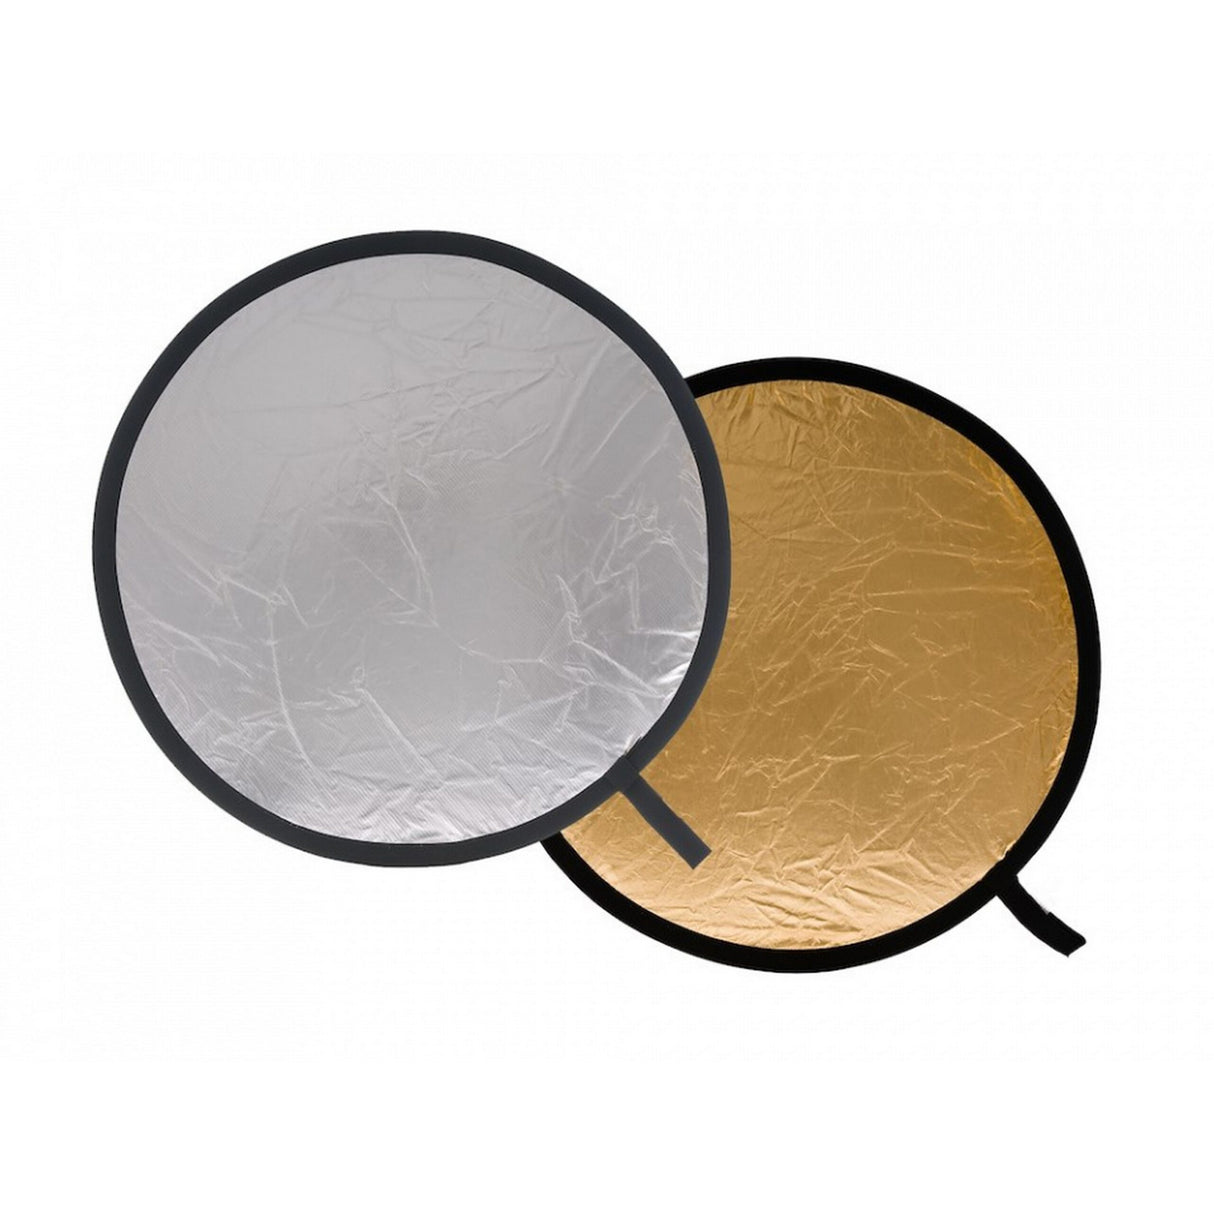 Lastolite LL LR3034 30 Inch Collapsible Reflector, Silver/Gold